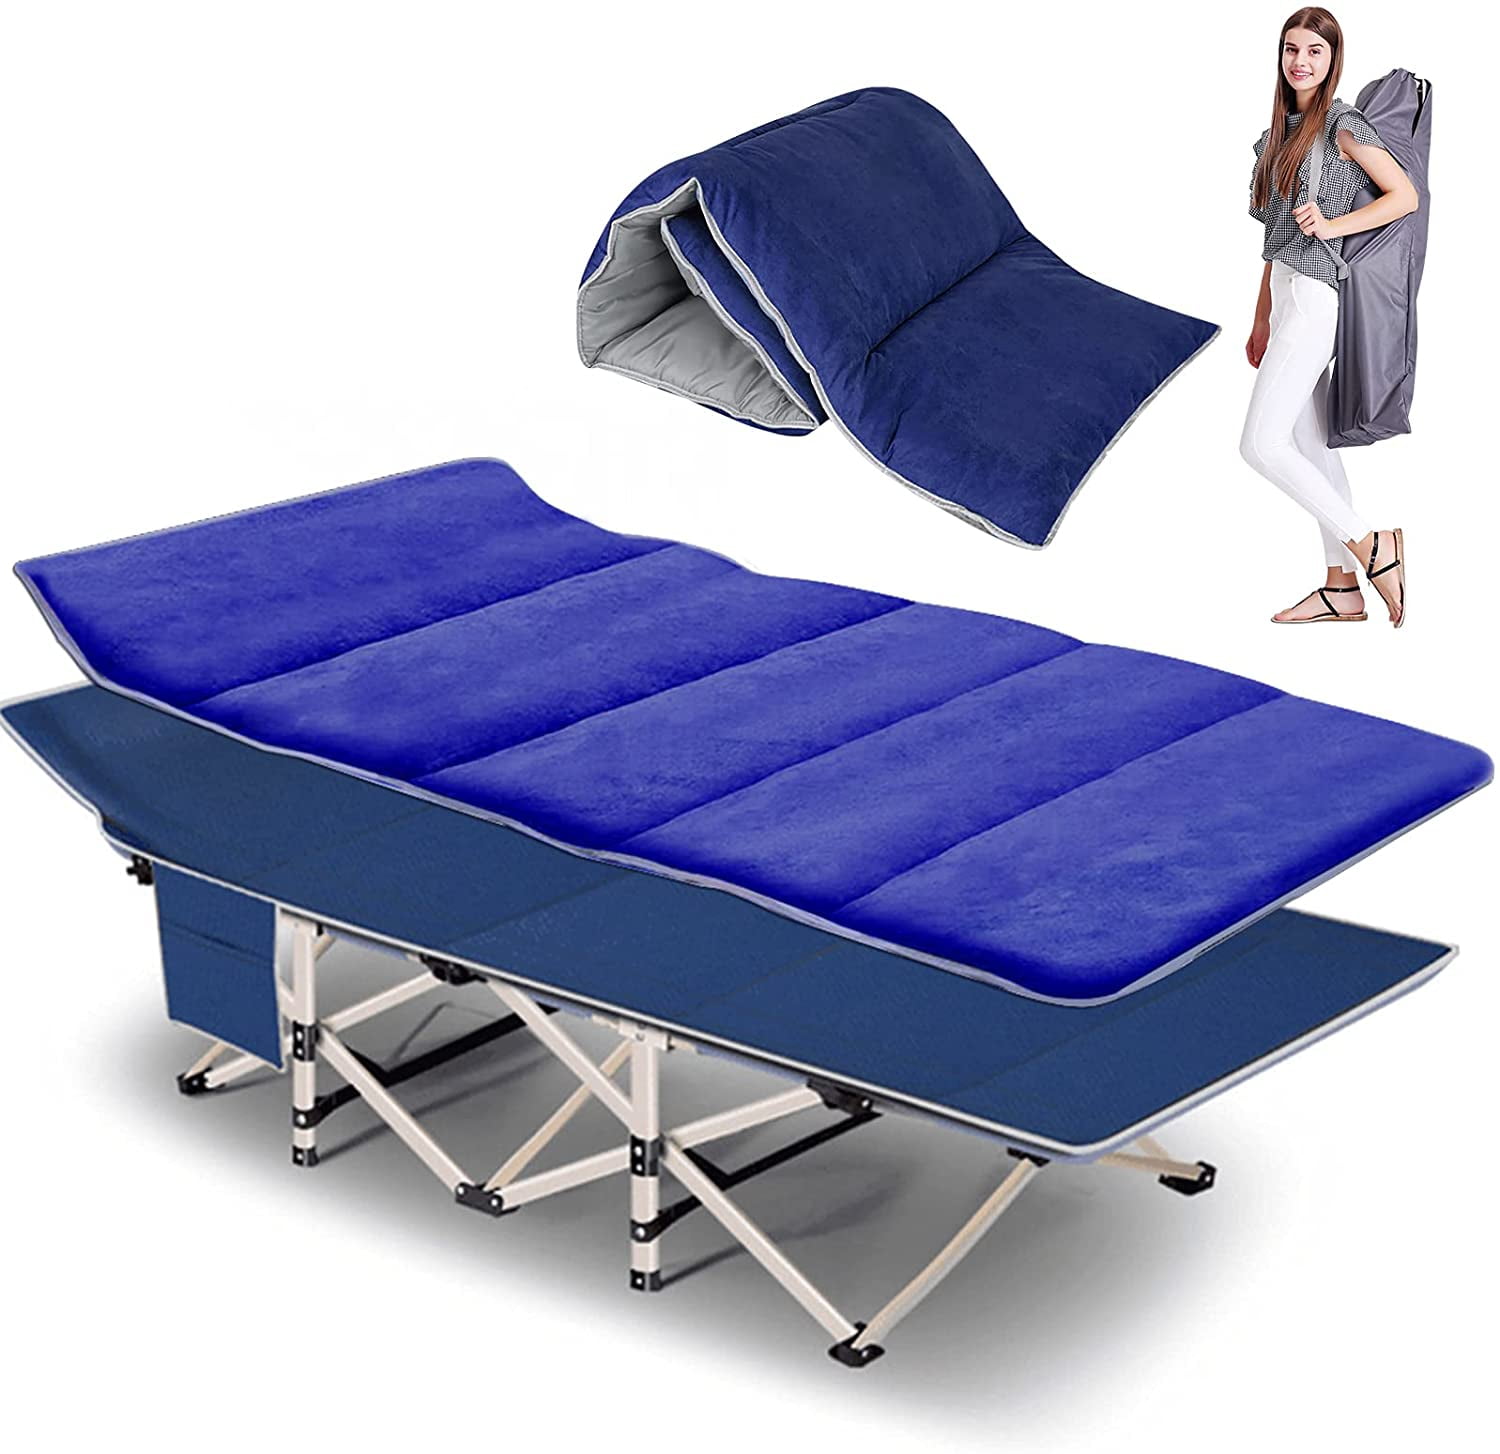 Portable Folding Camp Cot Adult Heavy Duty 75*26" Sturdy Sleep Bed Travel Office 